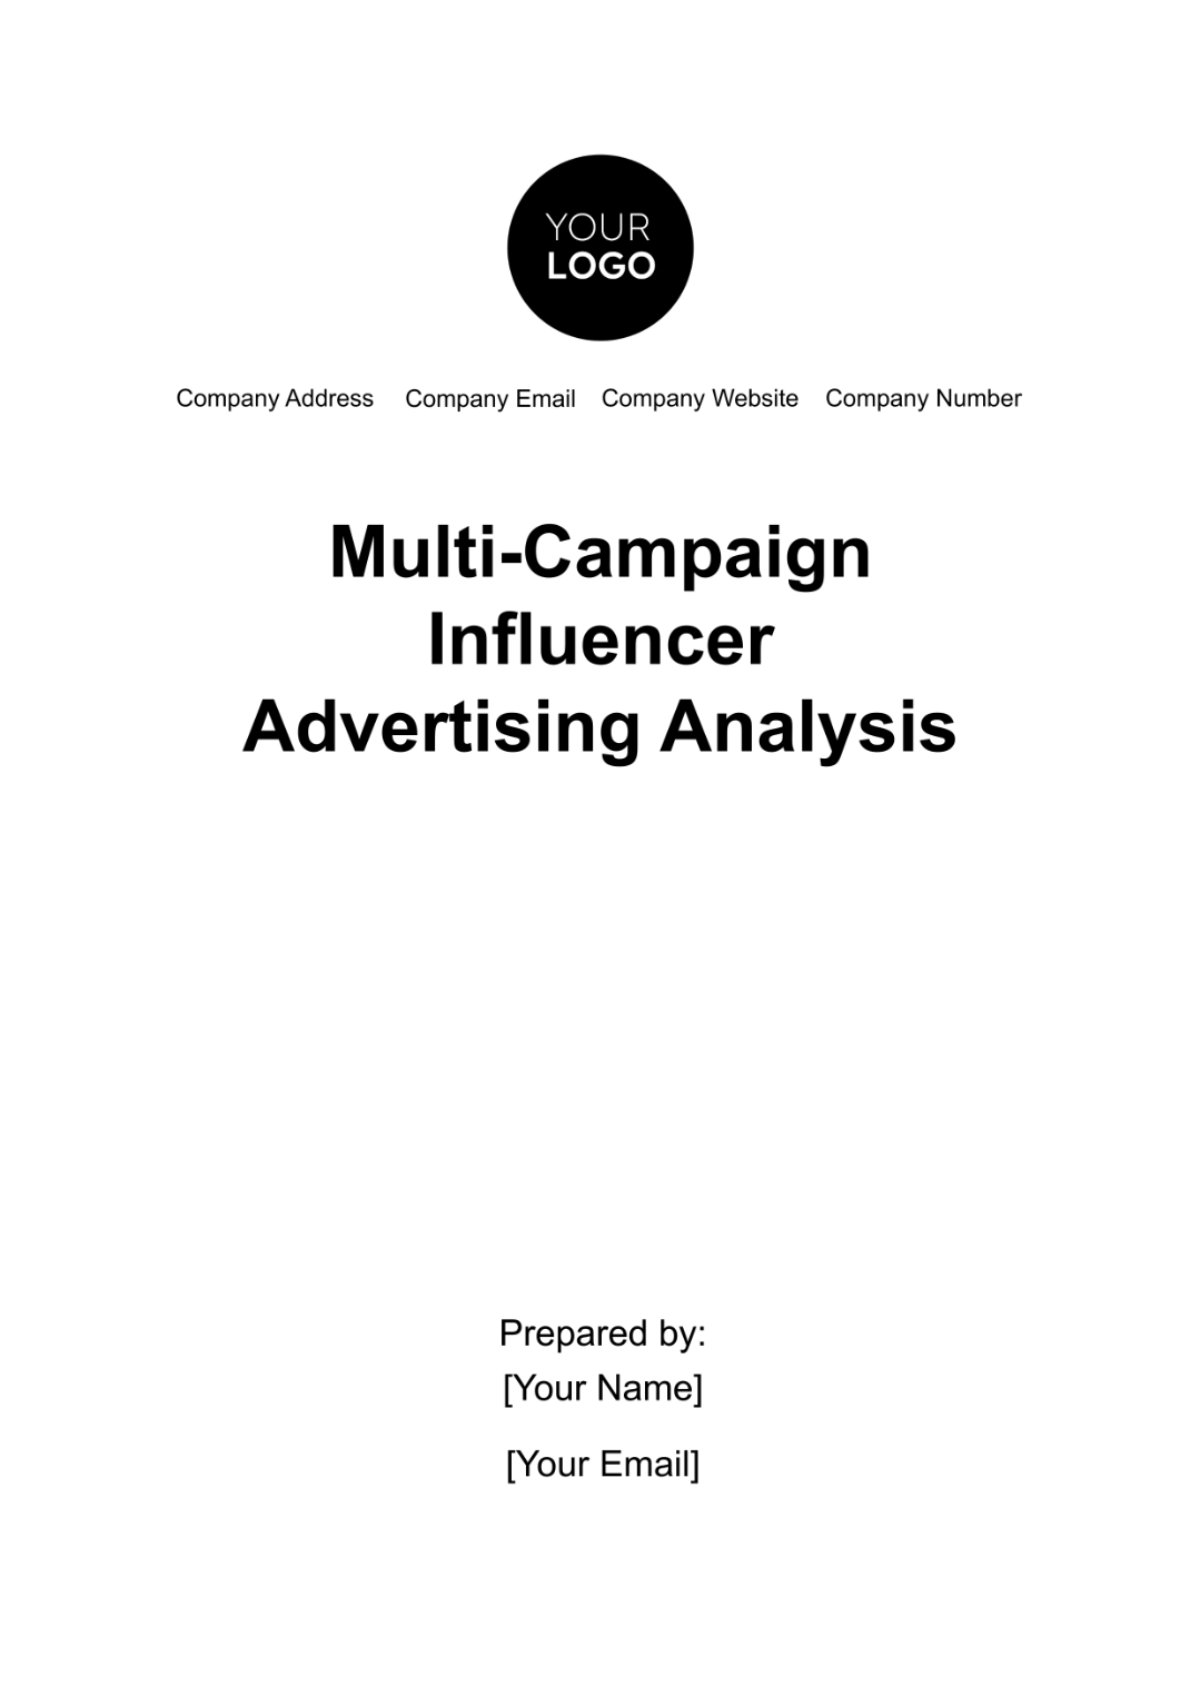 Free Multi-Campaign Influencer Advertising Analysis Template